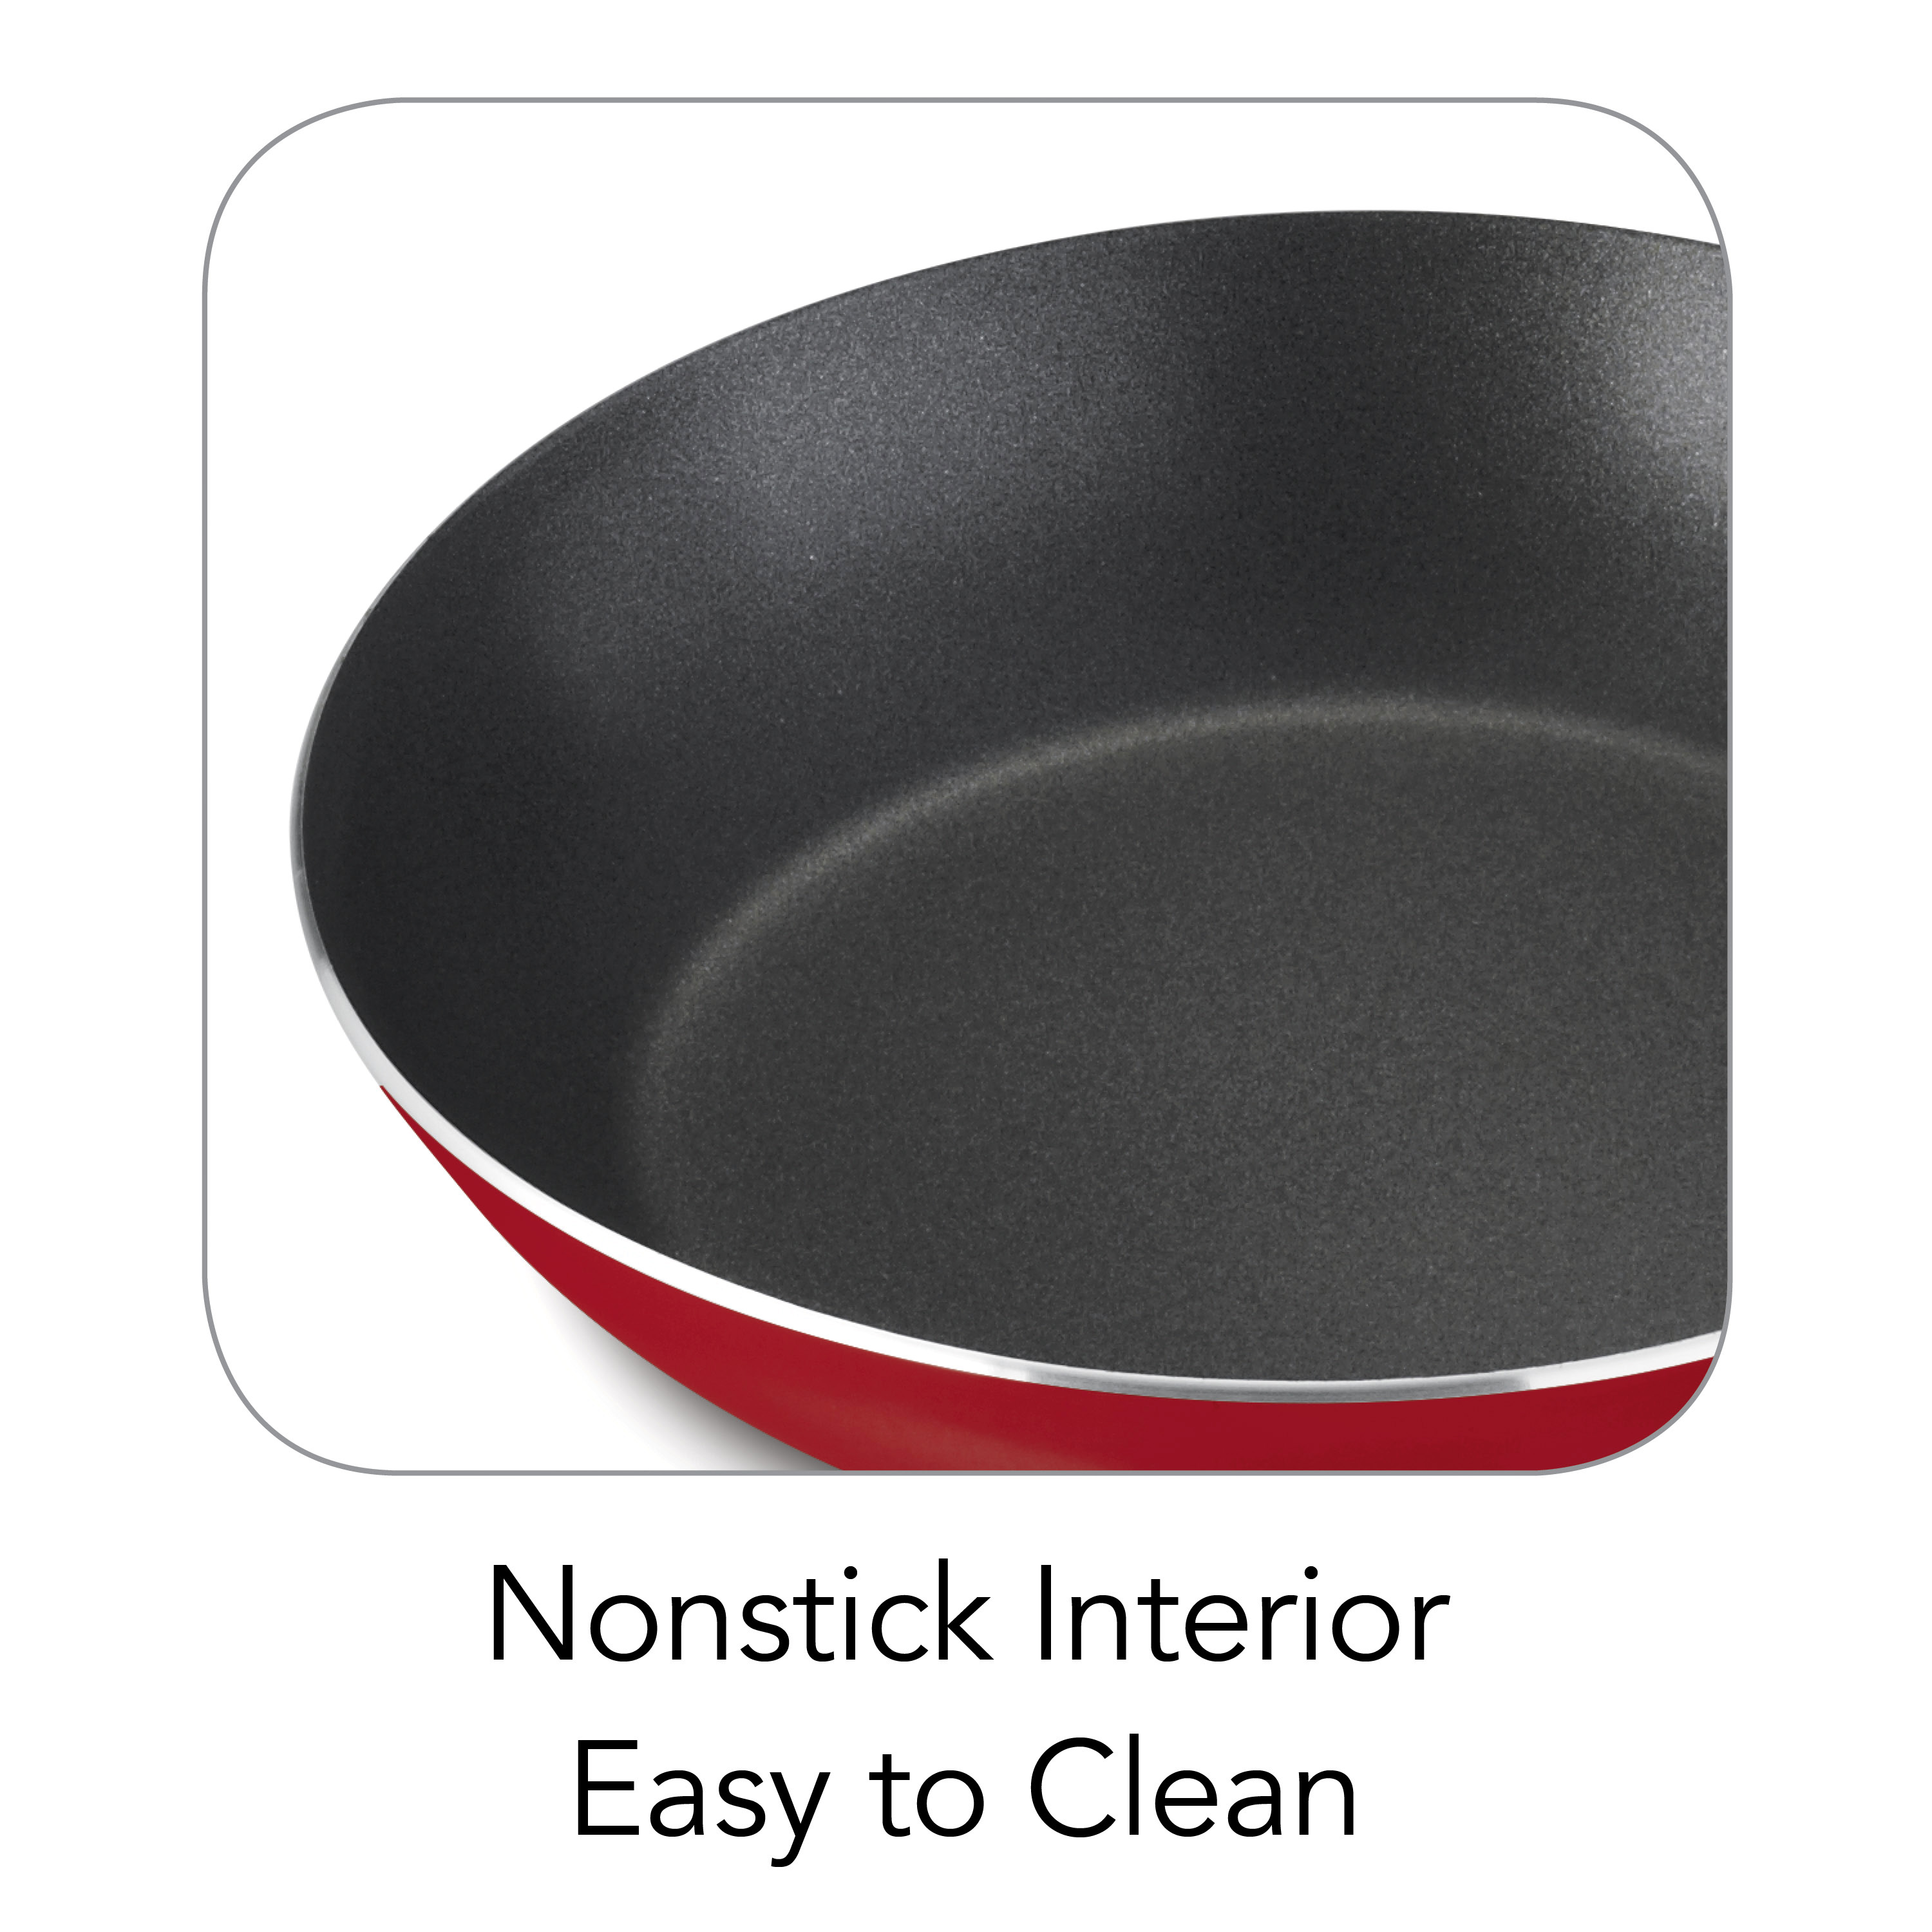 Tramontina 9-Piece Non-stick Cookware Set, Red - image 4 of 6